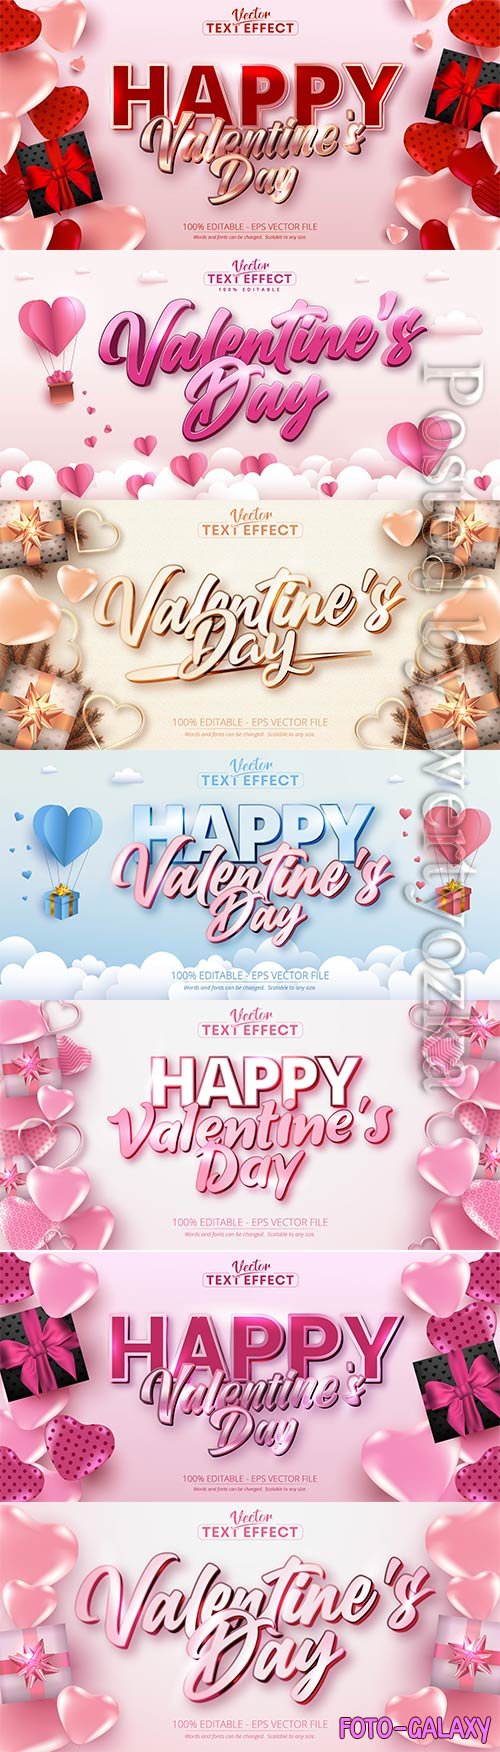 Valentine text effects style with hearts in vector